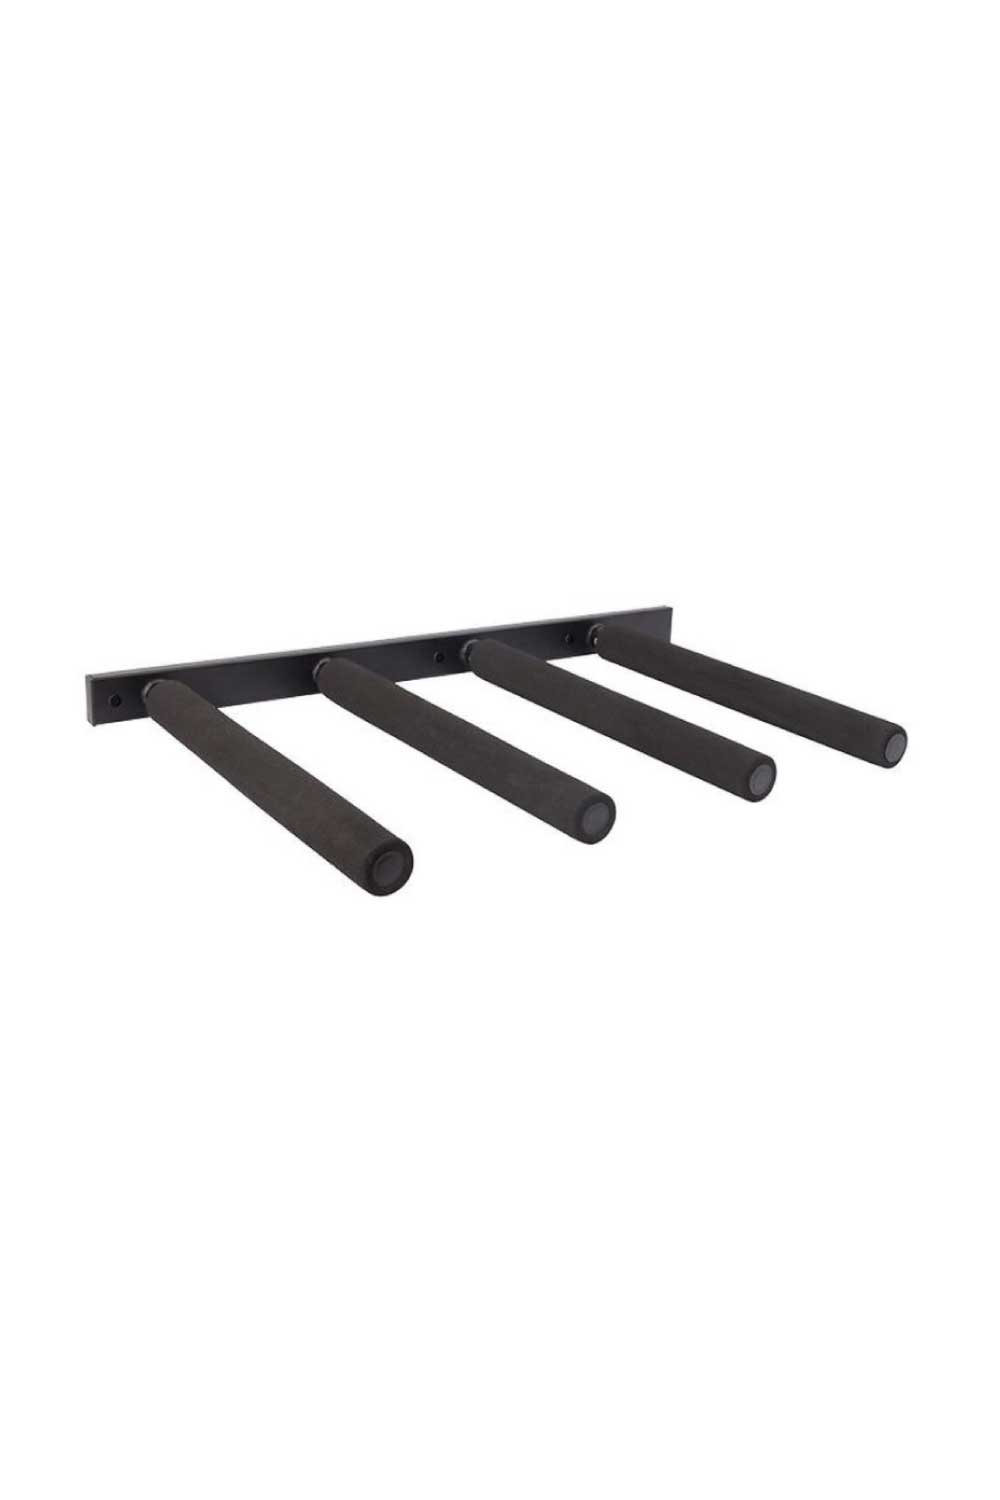 Ocean and Earth Stack Rax Single Rack (Fits 4 boards)